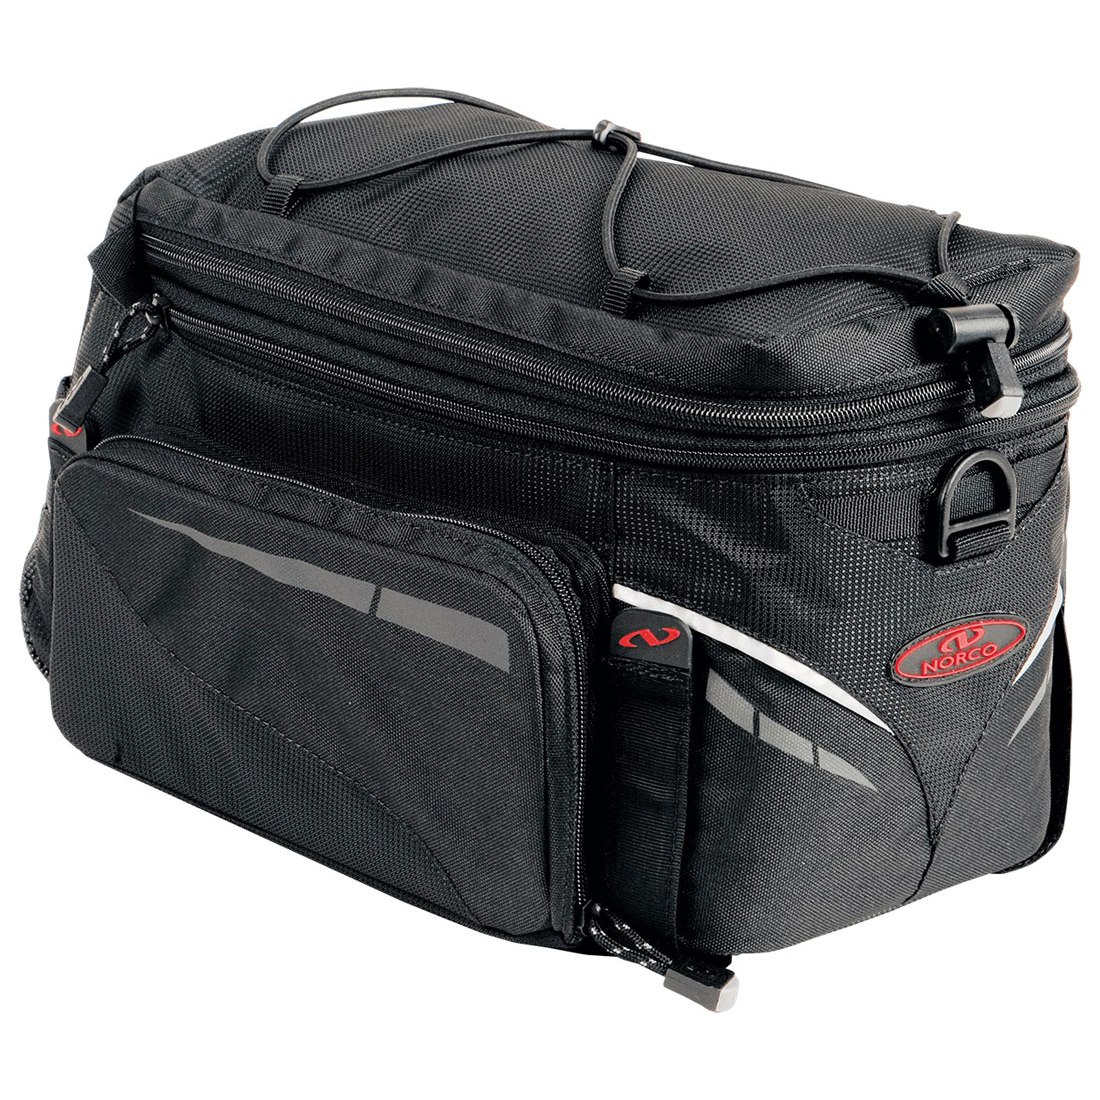 Productfoto van Norco Canmore Carrier Bag 0249AS - black